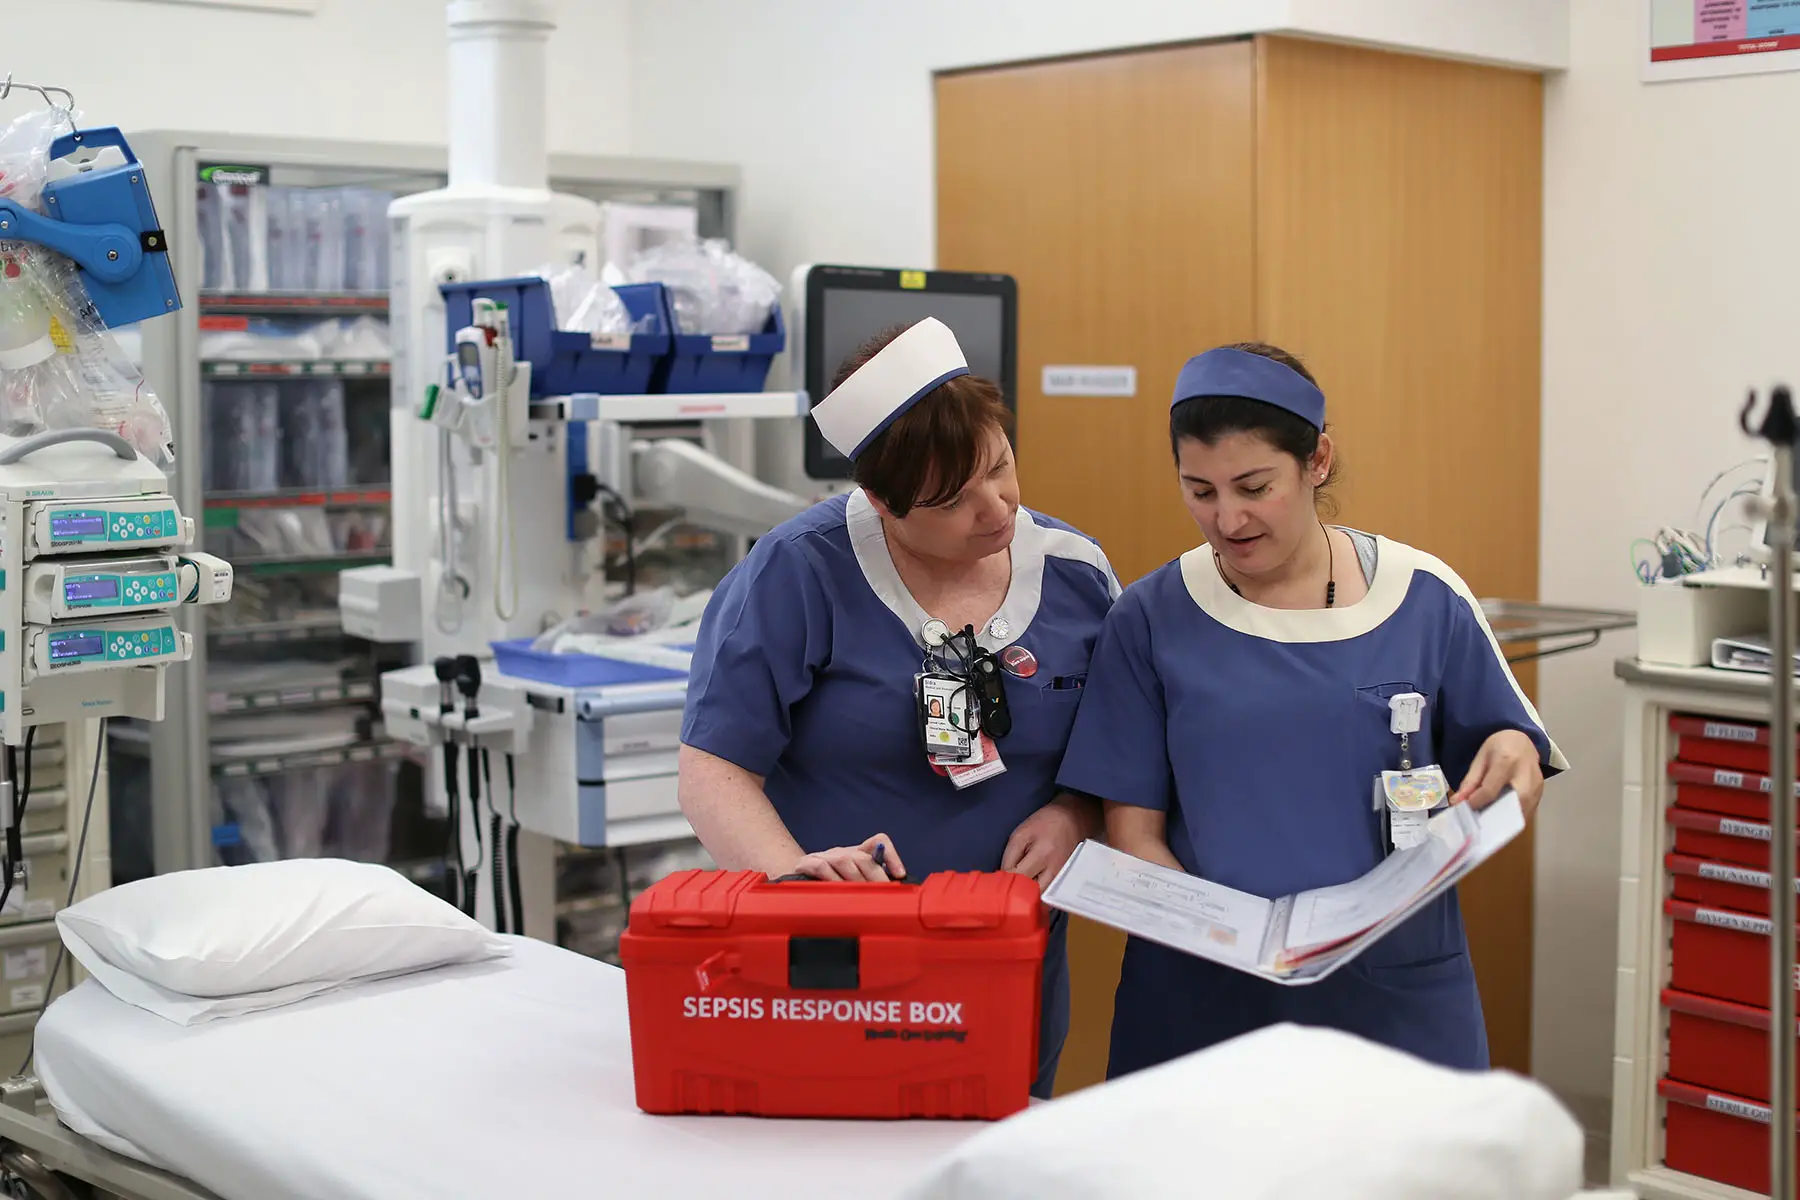 Two medical professionals discussing a procedure for responding to sepsis